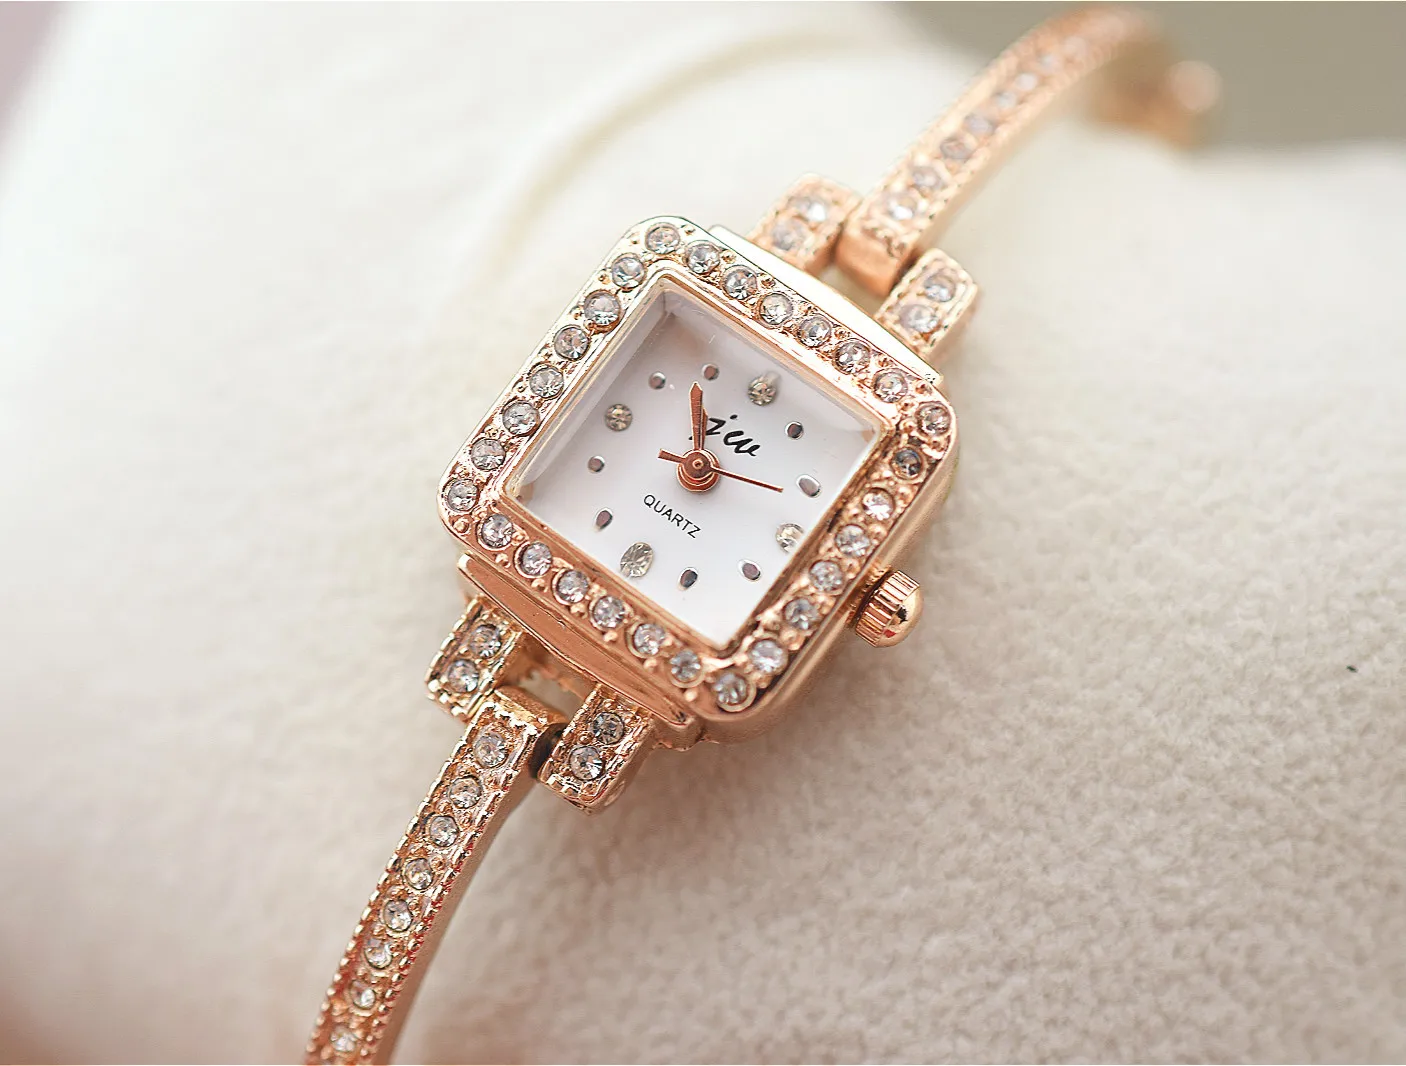 

Fashion JW Brand Ladies Watch Bracelet Female Square Dial Alloy Quartz Watches Rose Gold Stainless Steel for Women Gift Clock